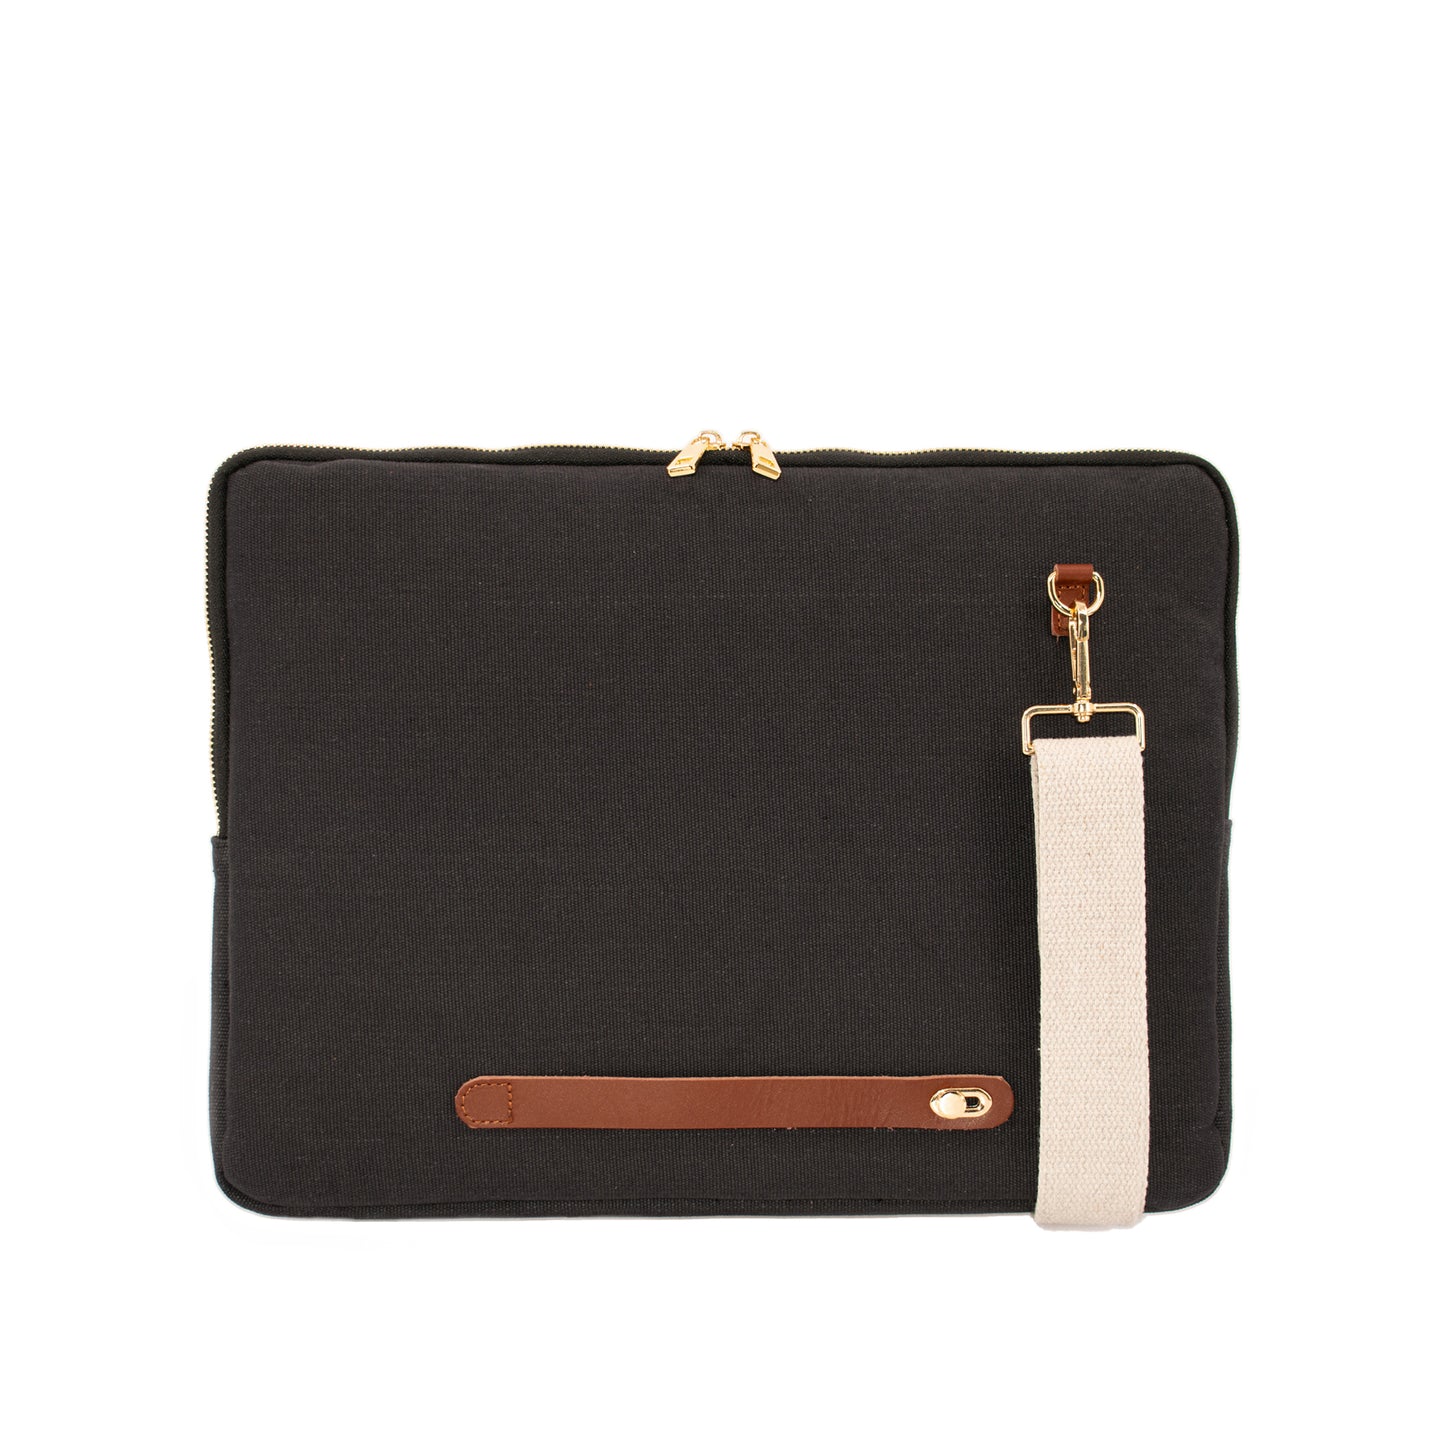 HCANSS ANTHRACITE CANVAS LAPTOP SLEEVE